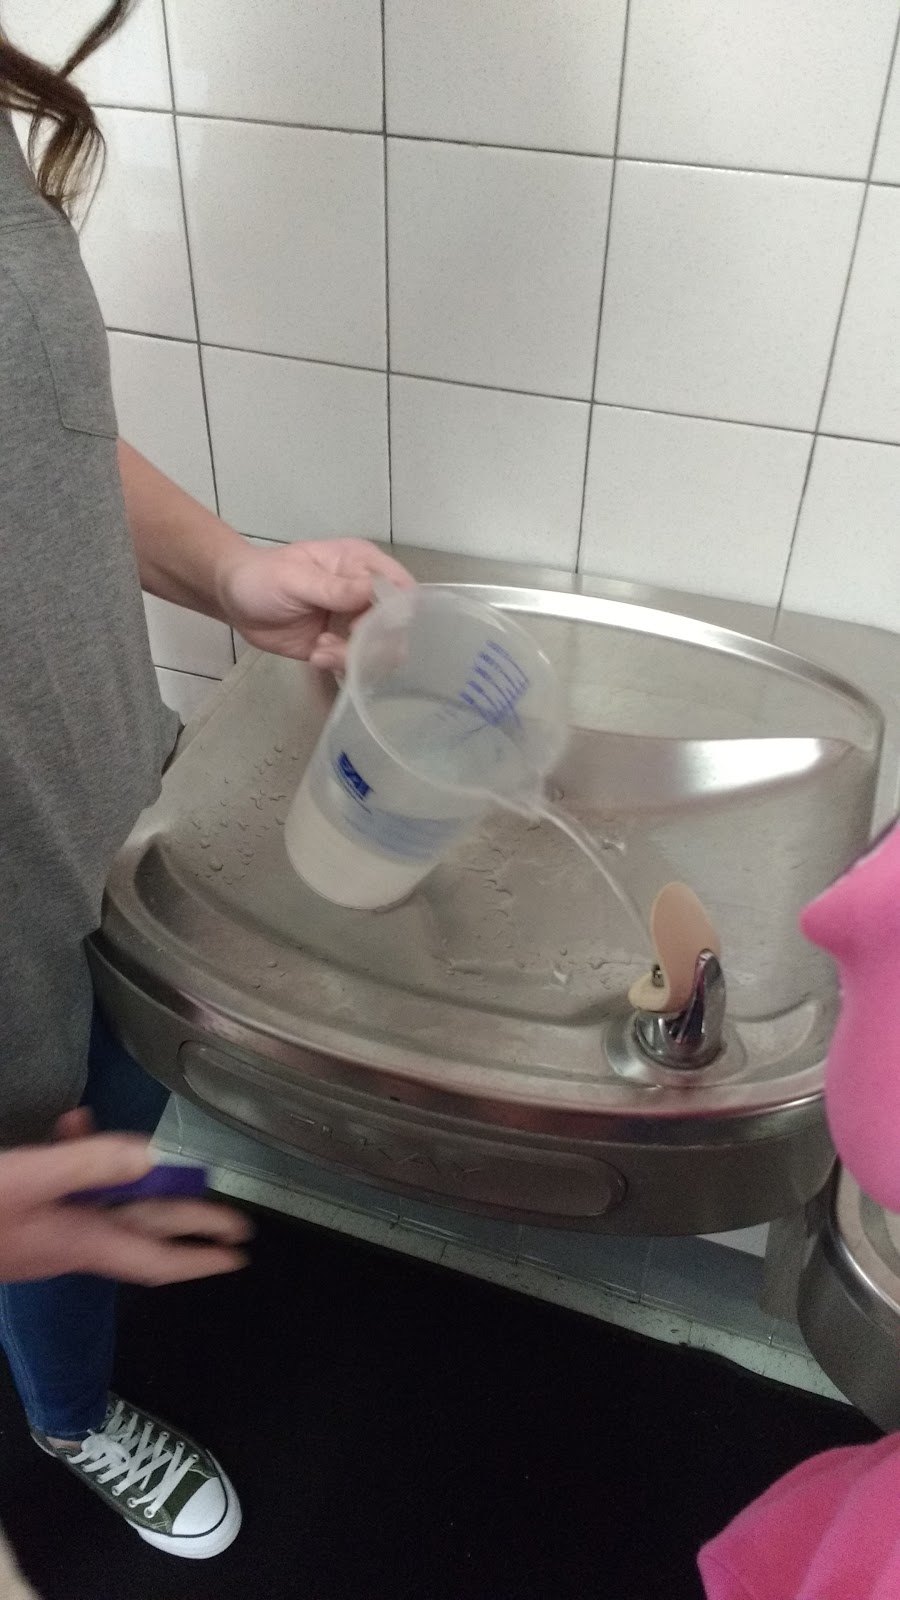 Filling Water Pitcher at Drinking Fountain